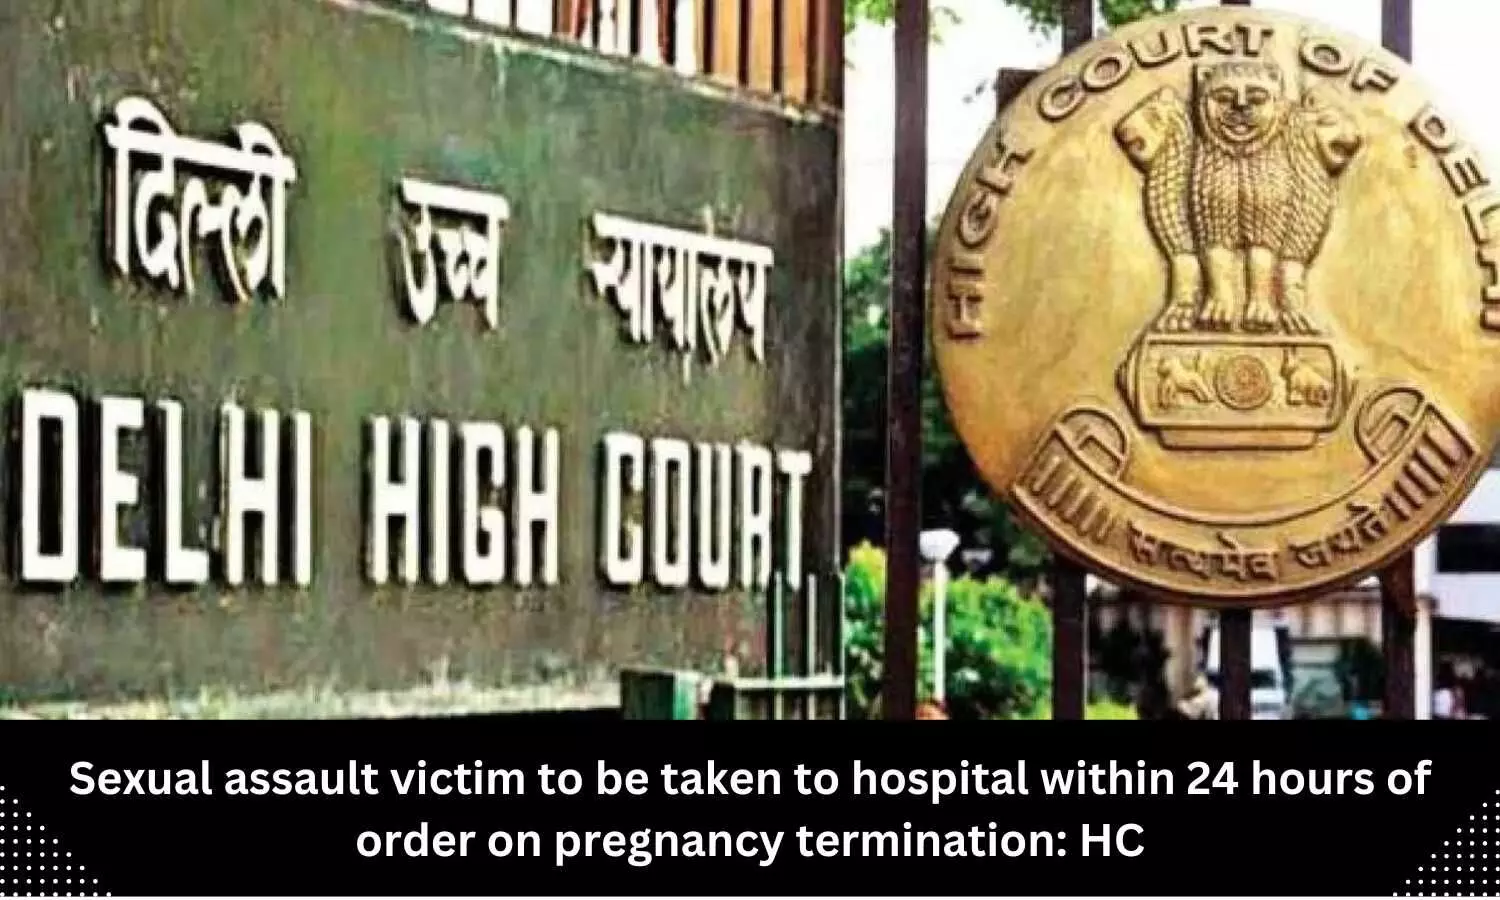 Rape victims must be taken to hospitals for MTP within 24 hours even if she is less than 20 weeks pregnant: Delhi HC